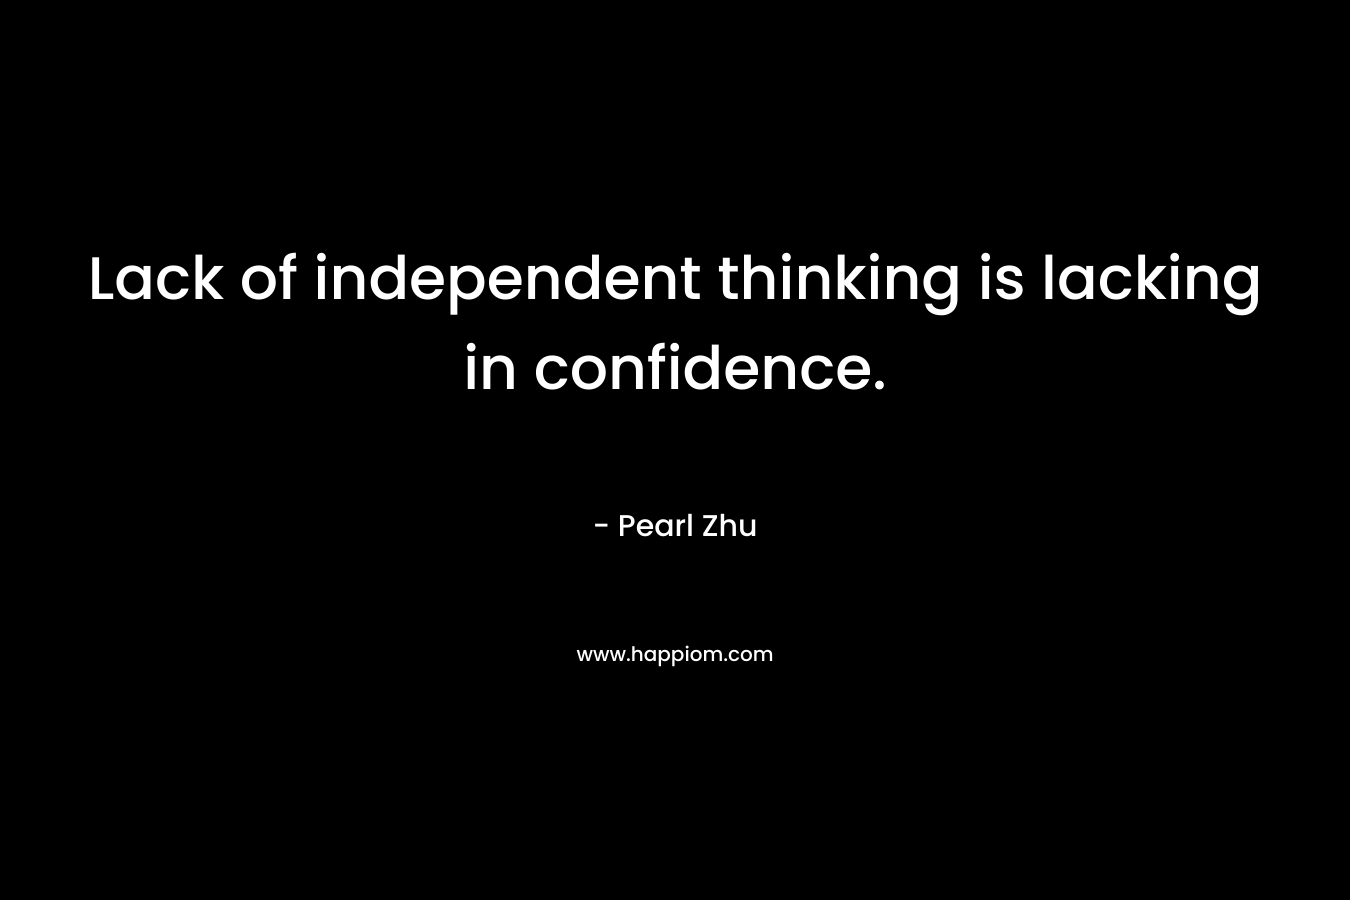 Lack of independent thinking is lacking in confidence.